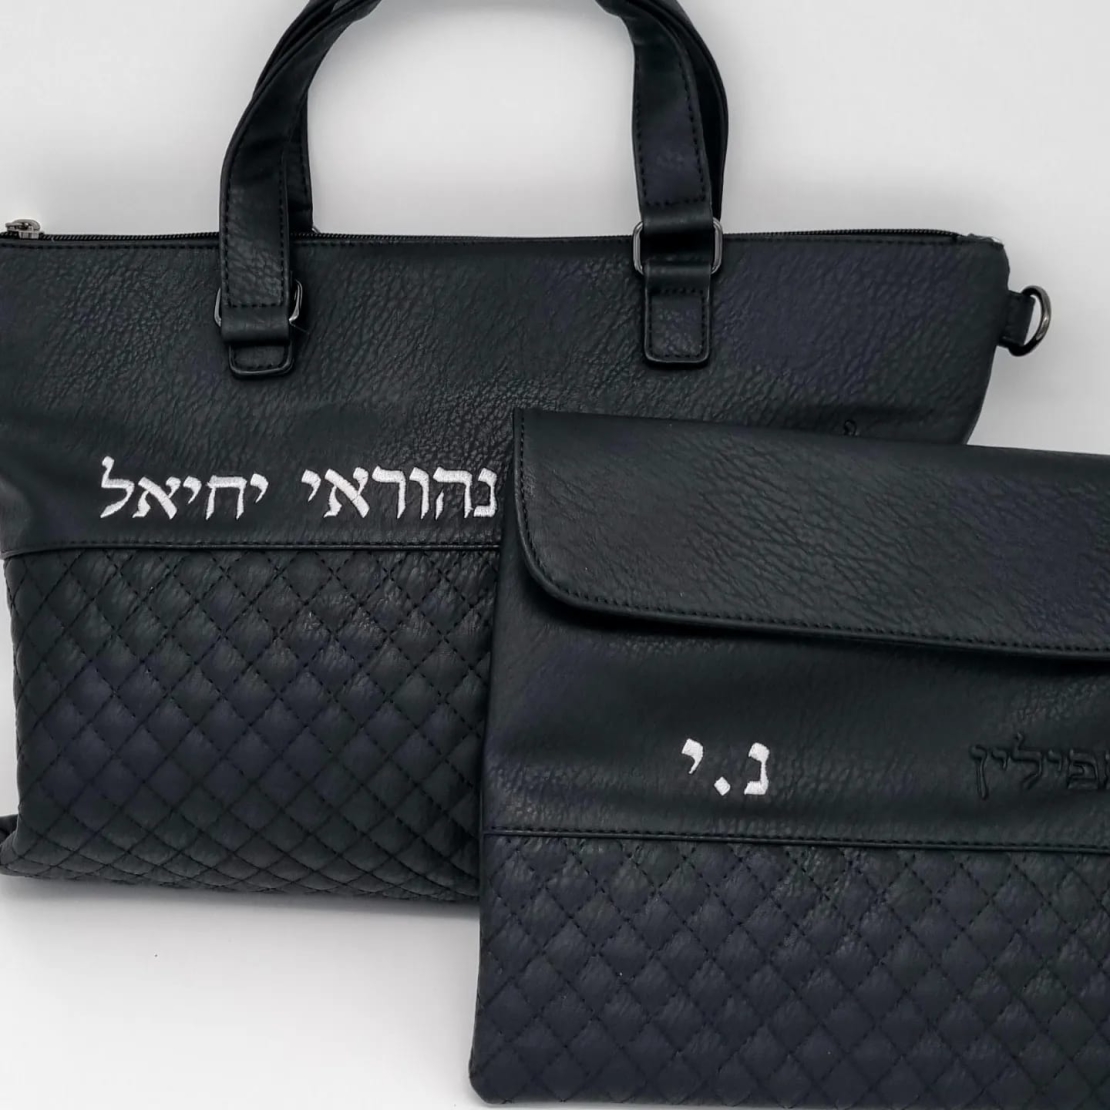 Luxurious mouth-watering tefillin tallit bag with rounded handle 38X31 cm, including embroidery, gift name